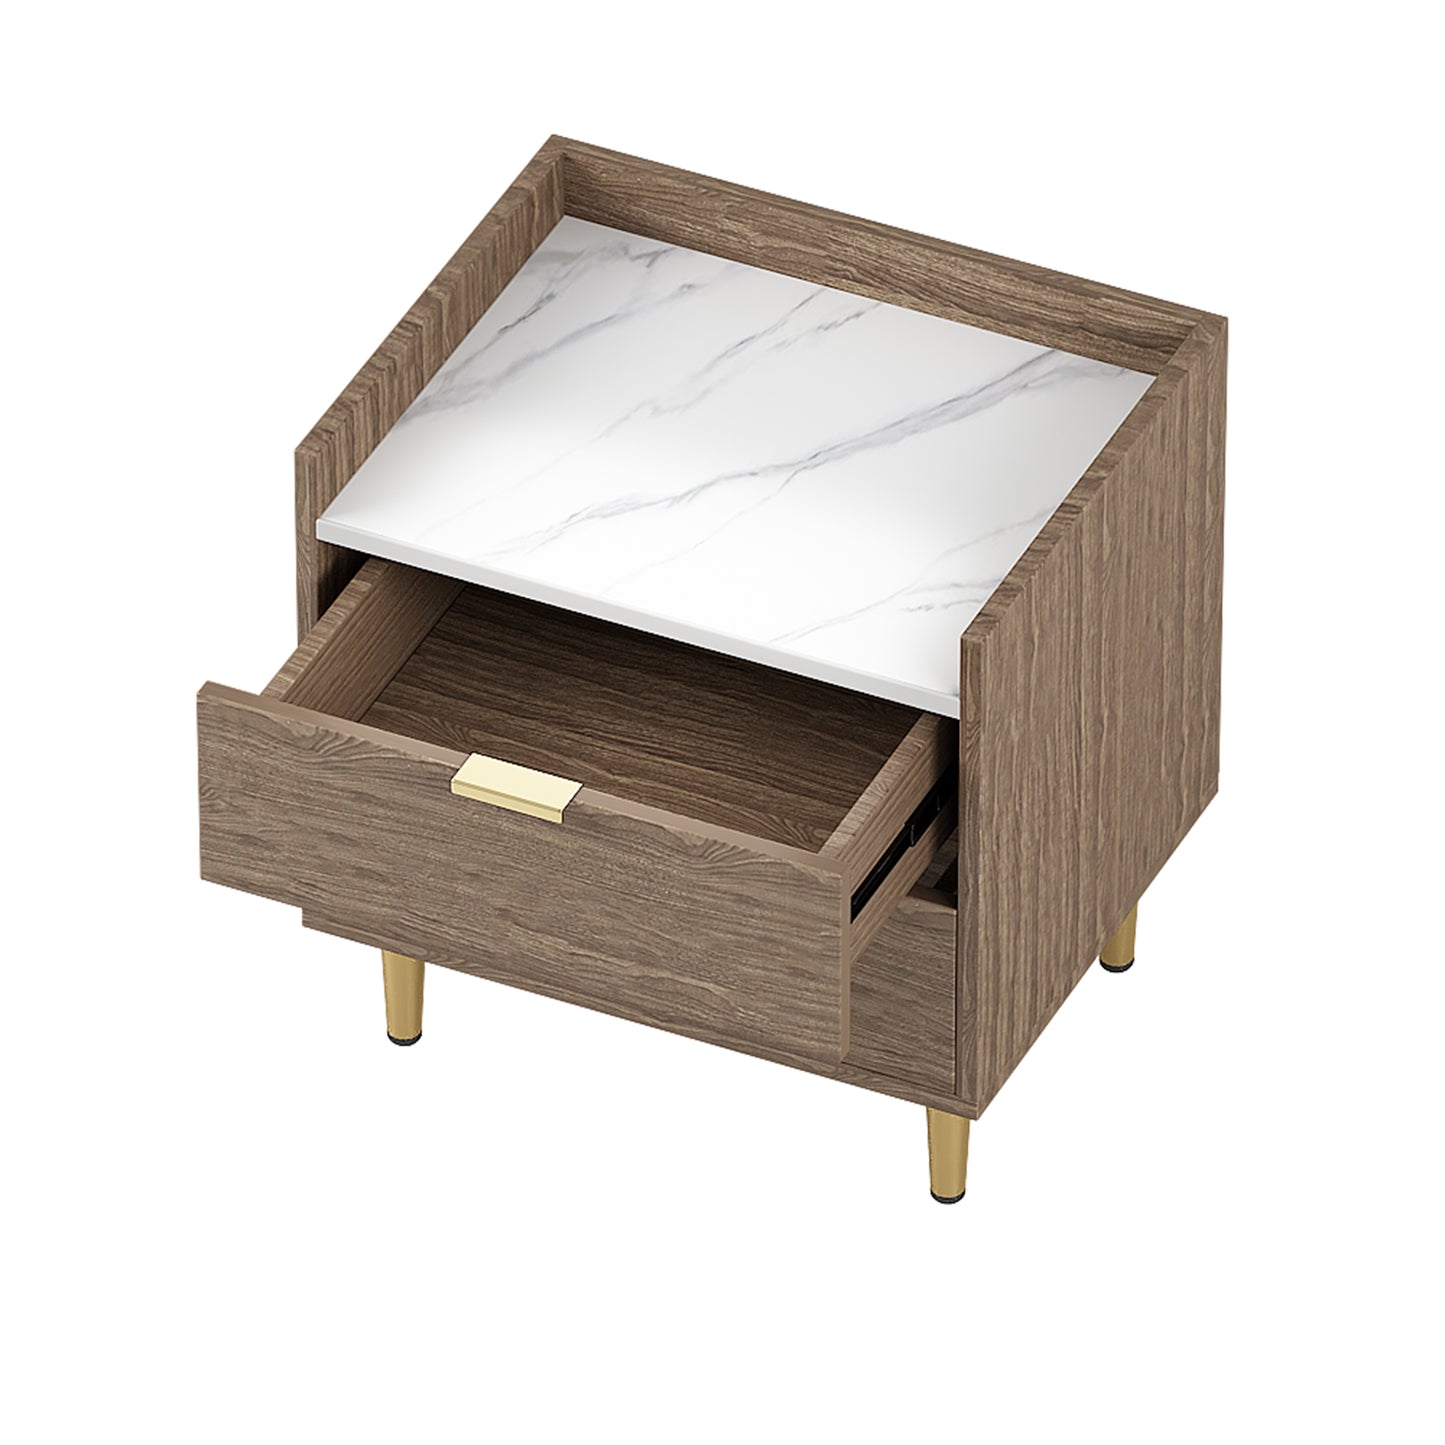 Wooden Nightstand with 2 Drawers and Marbling Worktop, Mordern Wood Bedside Table with Metal Legs&Handles, Walnut